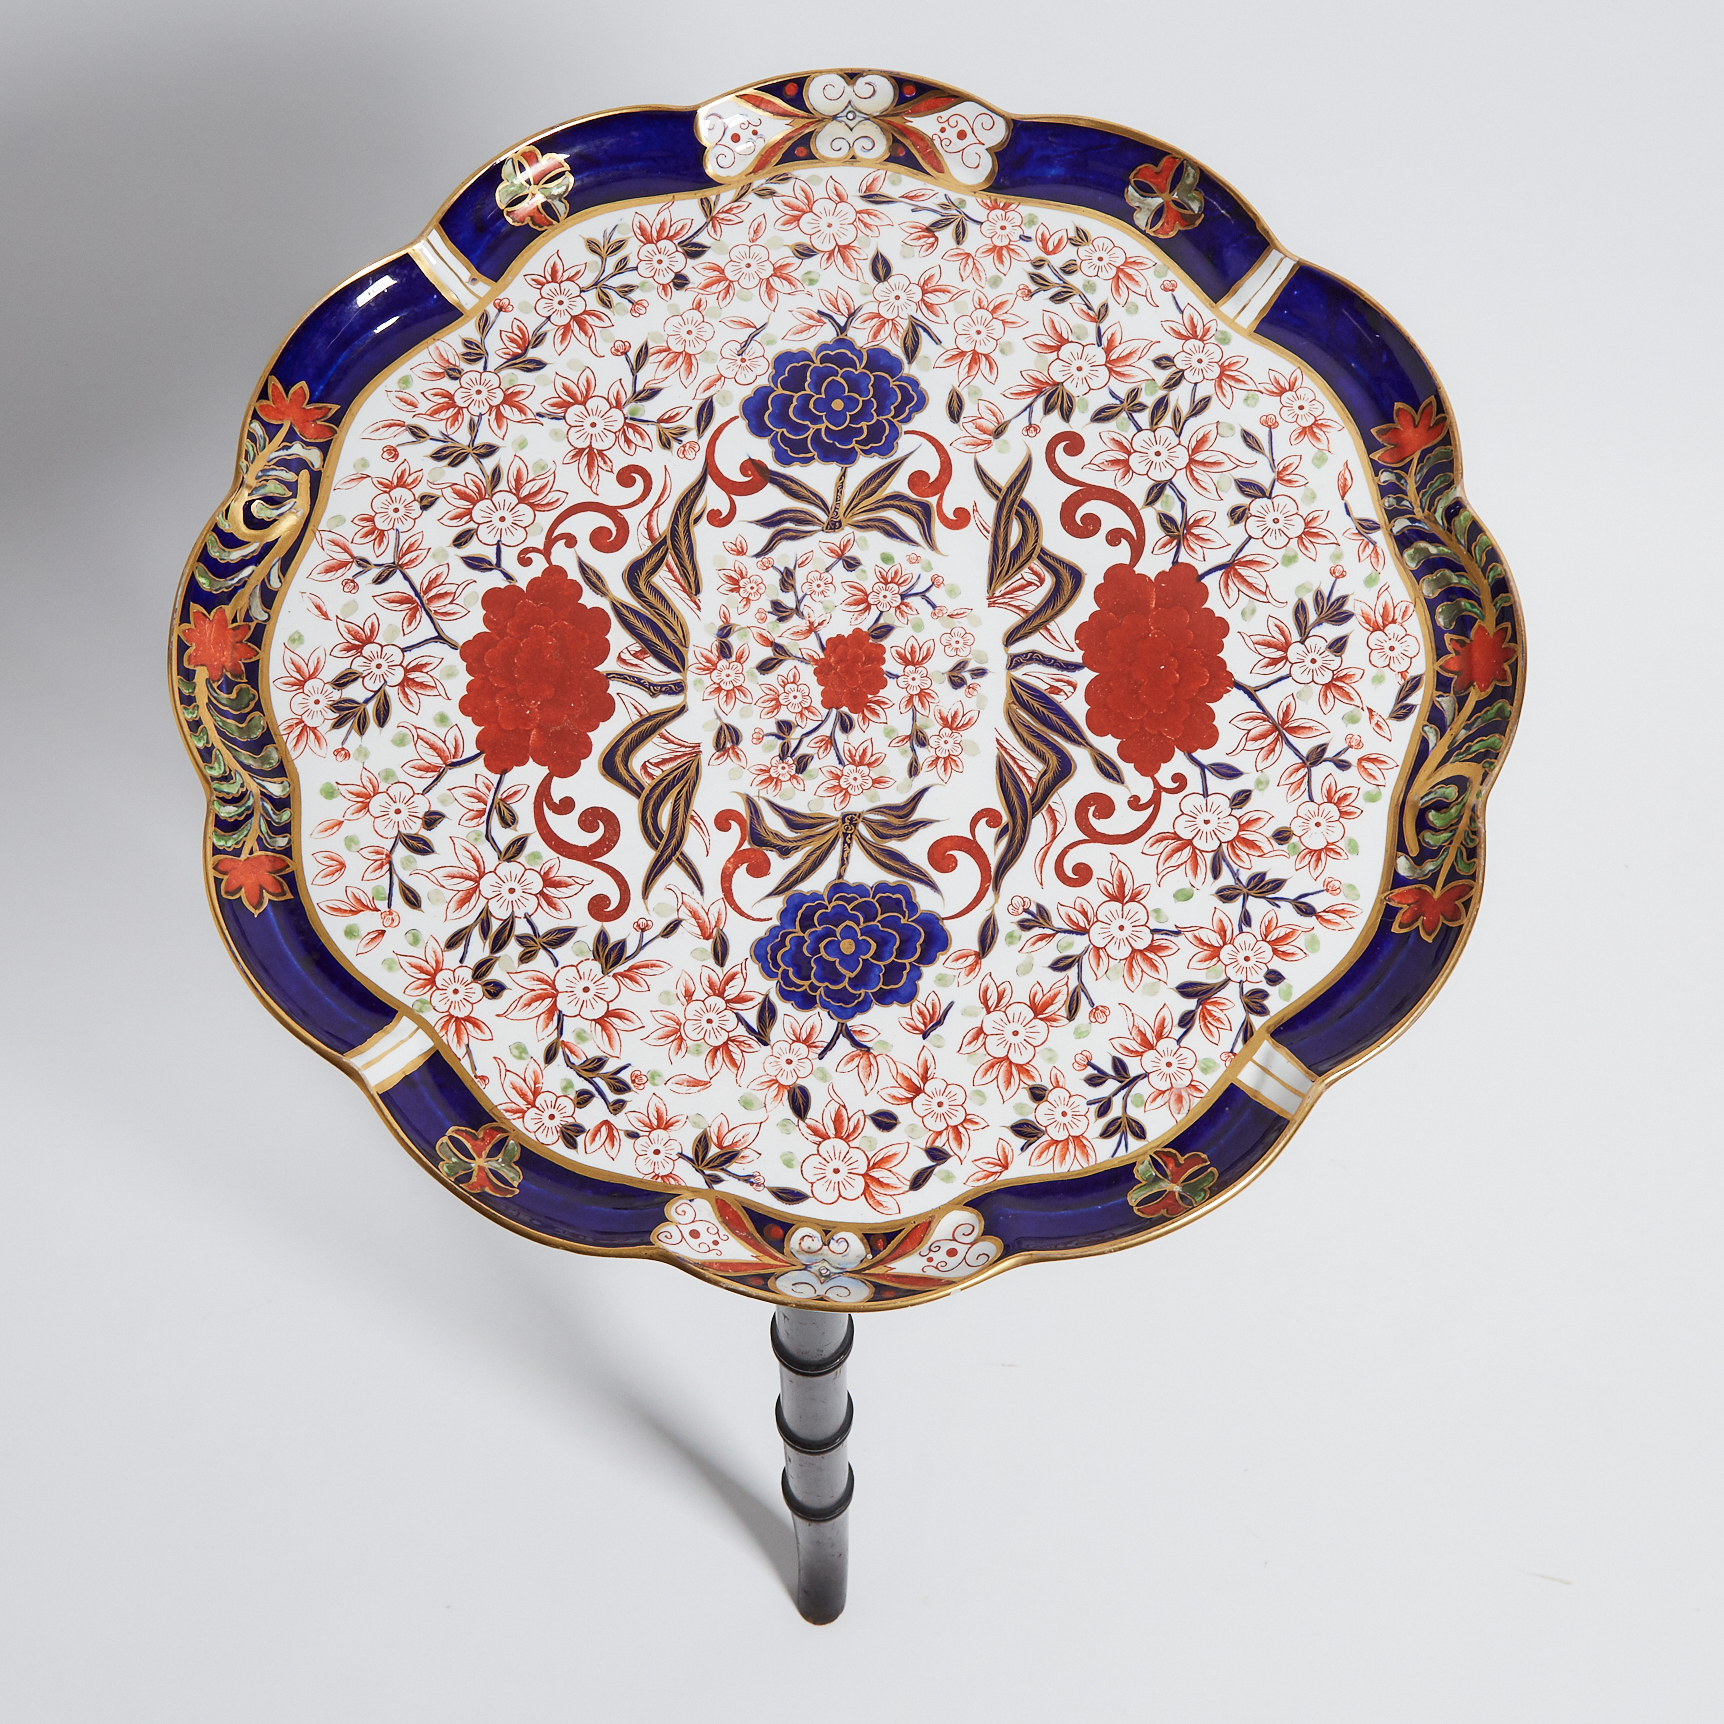 Derby Crown Porcelain Co. Japan Pattern Tray-Topped Table, c.1877-90